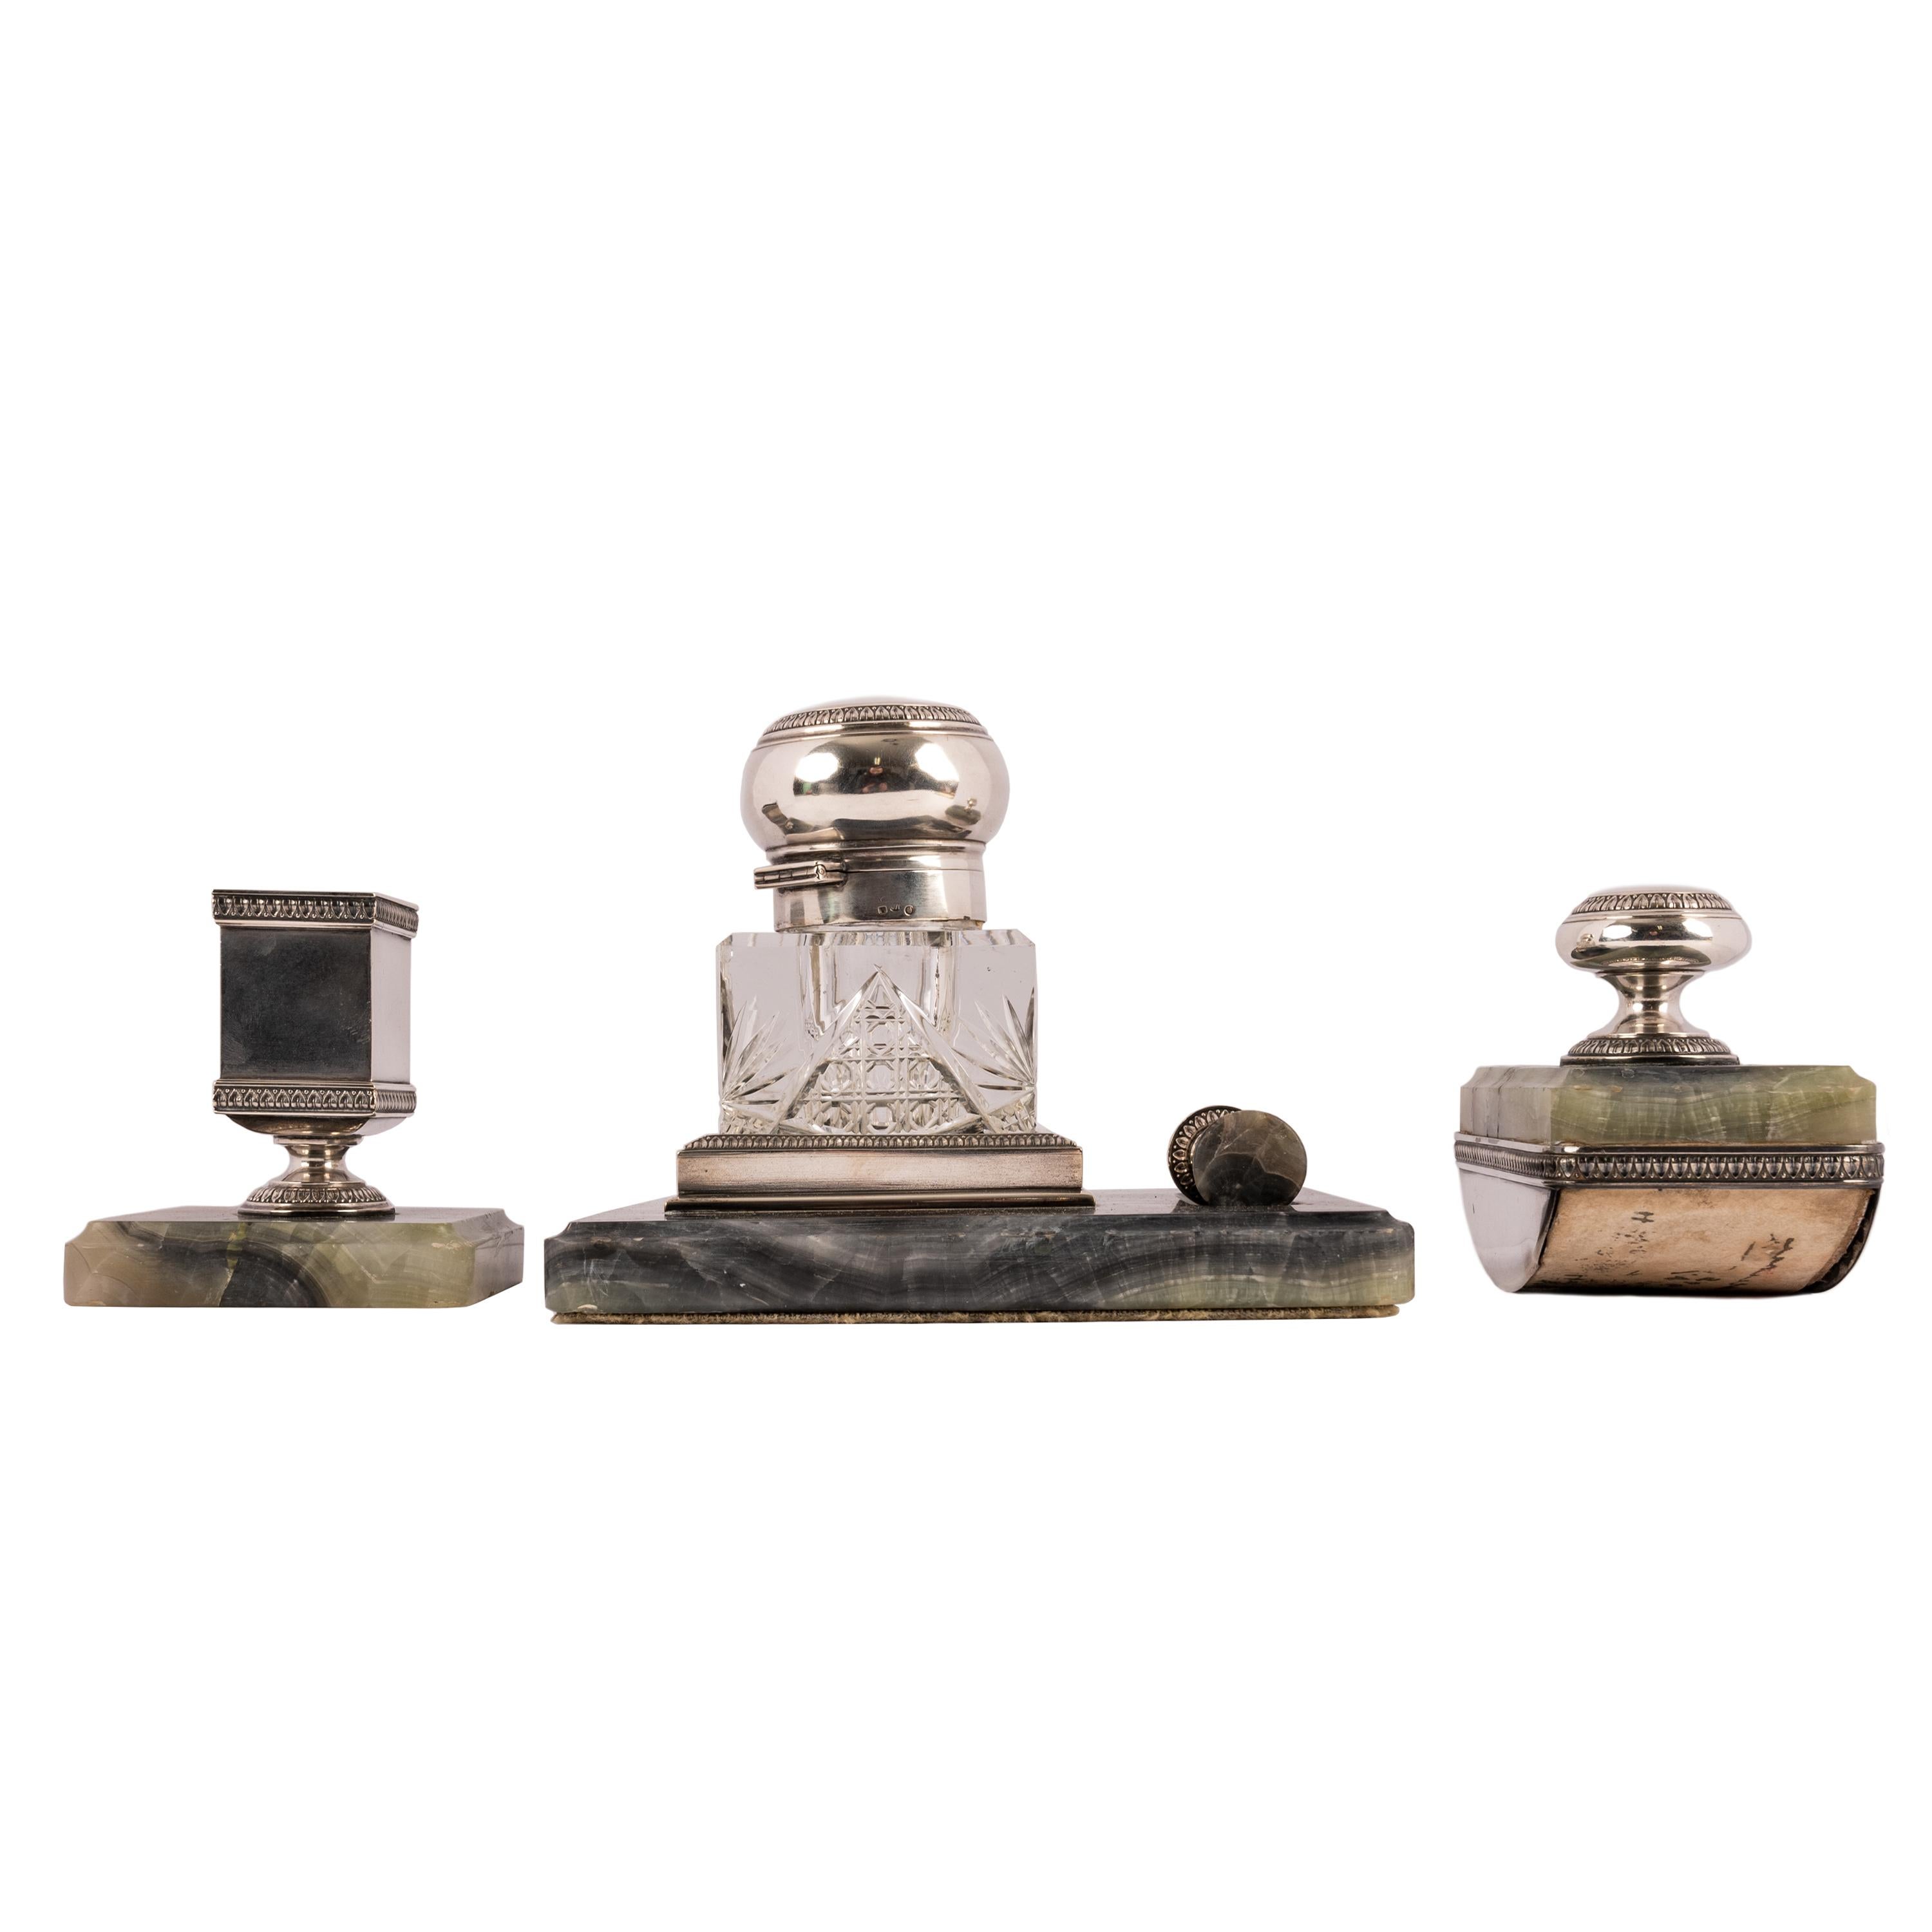 A good antique Russian Imperial silver and onyx four piece desk set, circa 1896.
The set having variegated onyx bases and silver mounts,  comprising a cut glass inkwell (which is removeable from the silver and onyx base), plus a seal to close